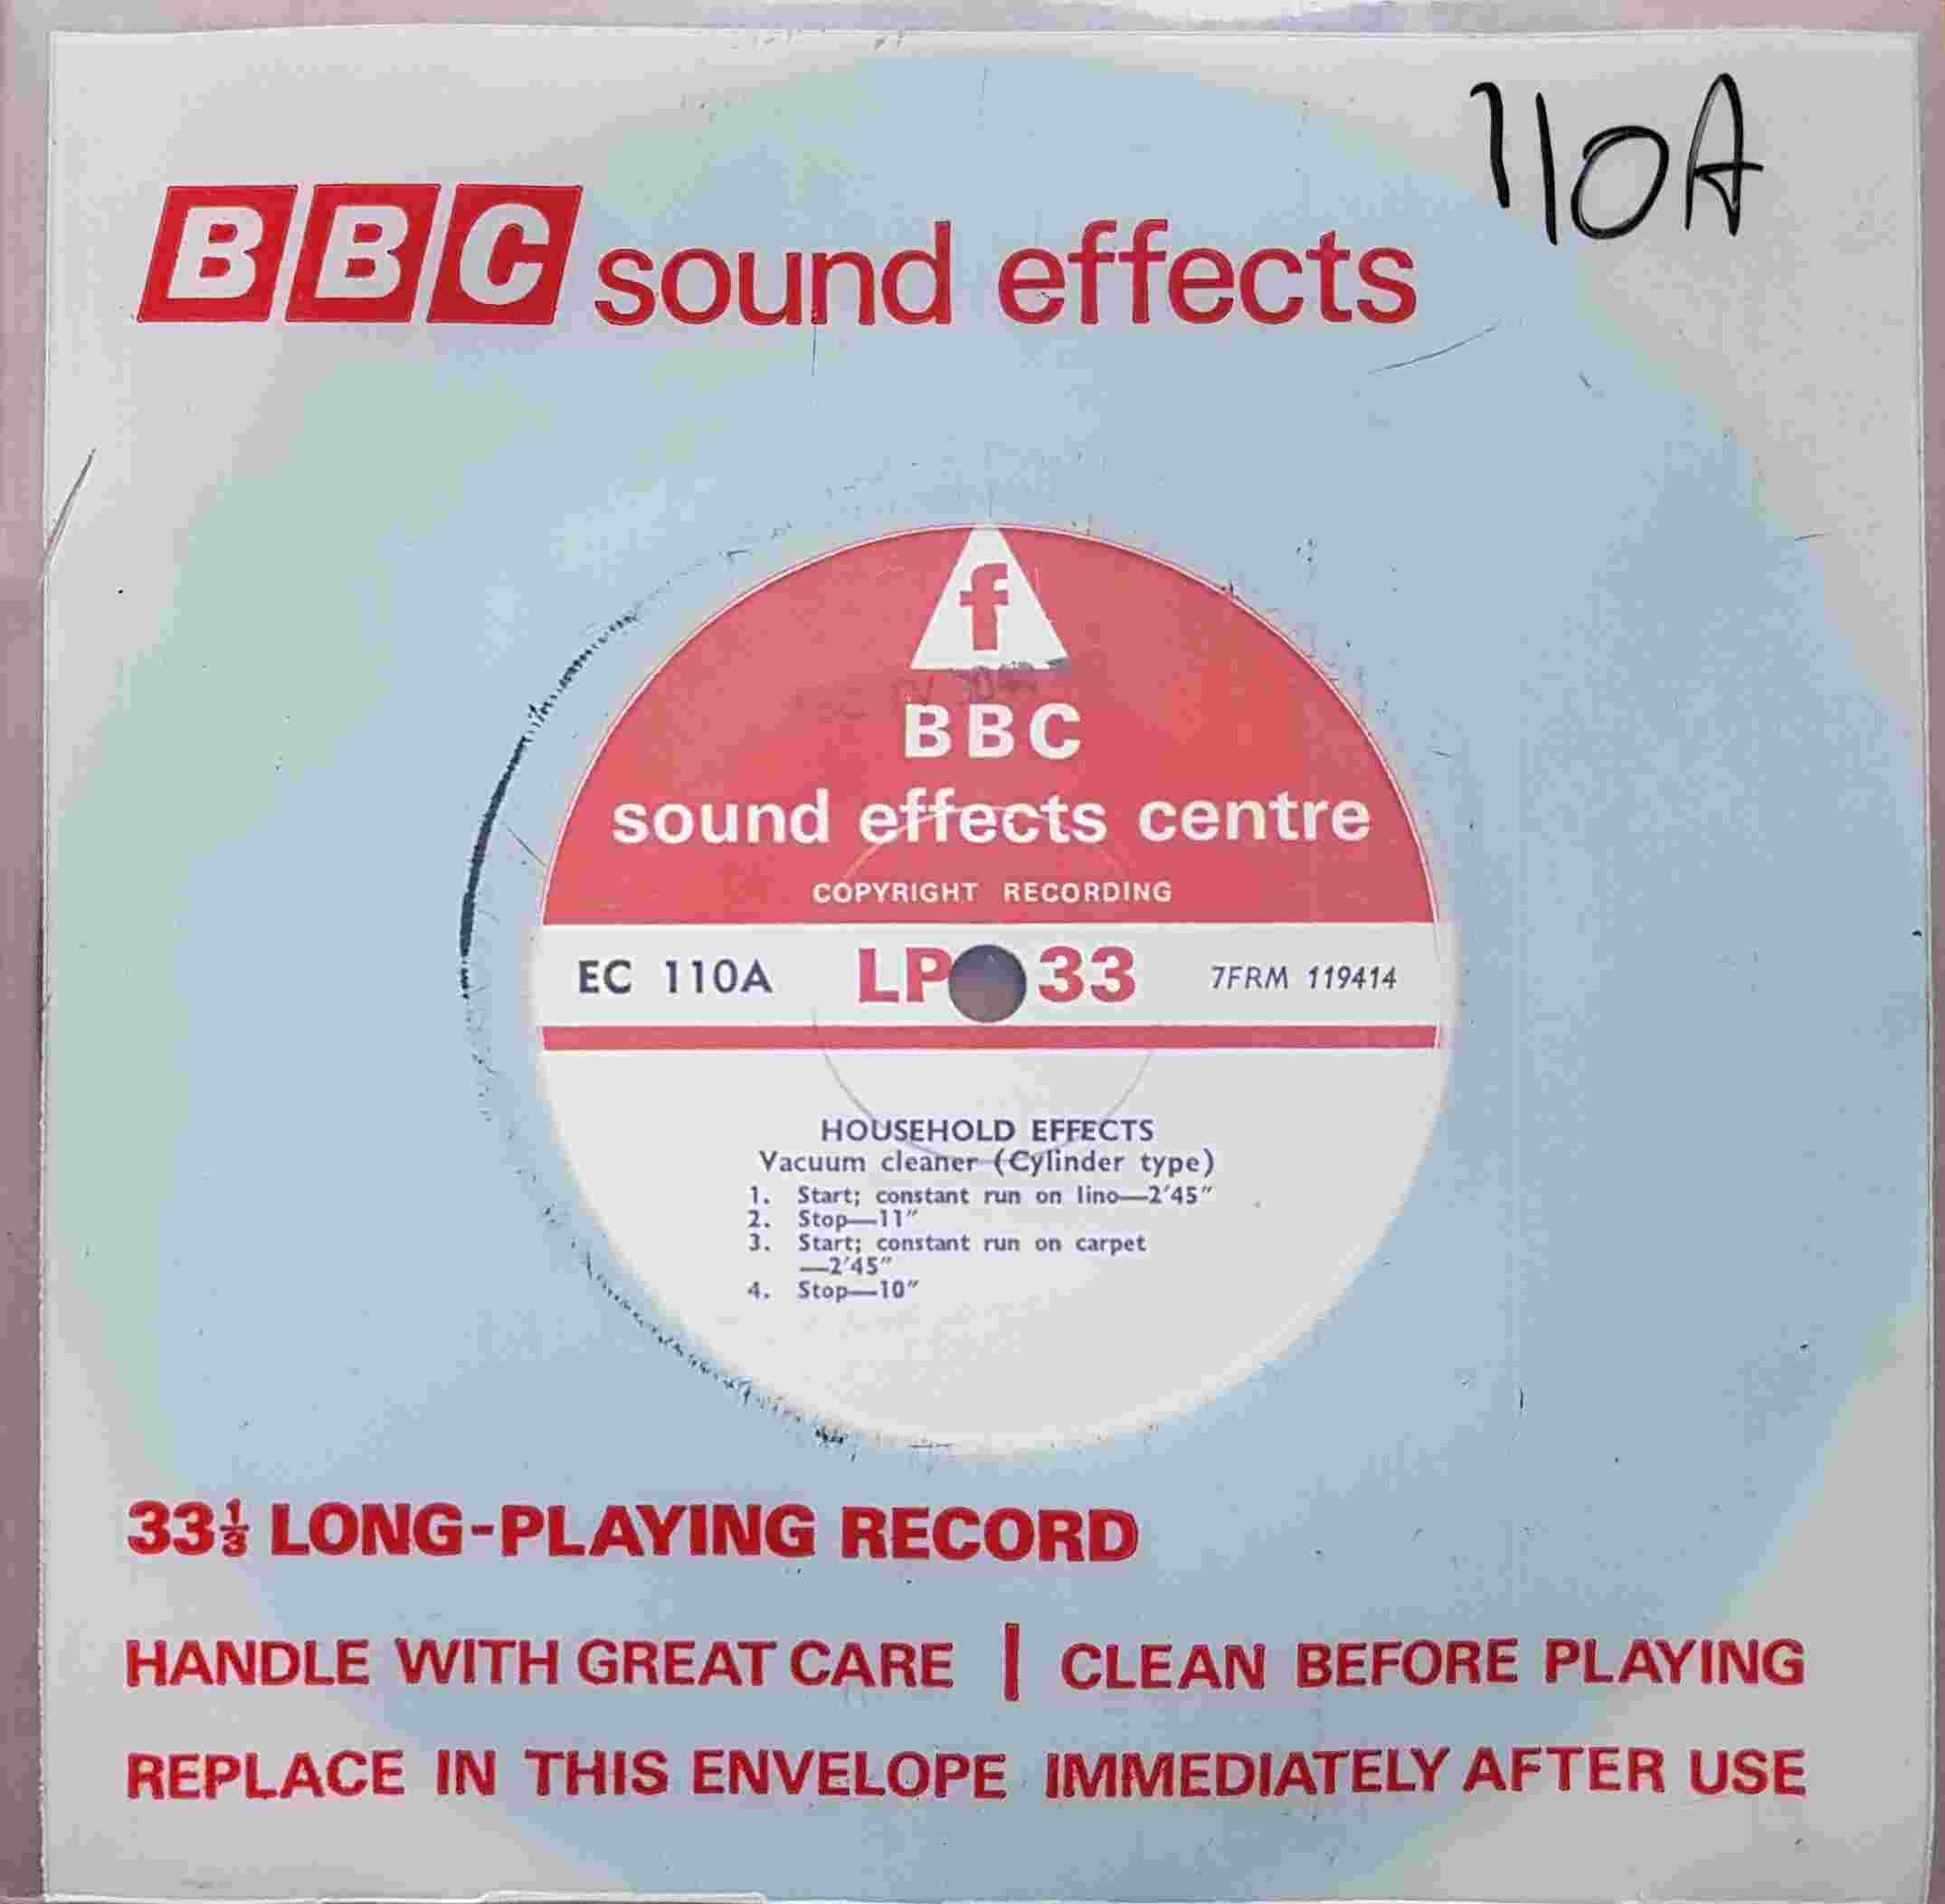 Picture of EC 110A Household effects by artist Not registered from the BBC singles - Records and Tapes library